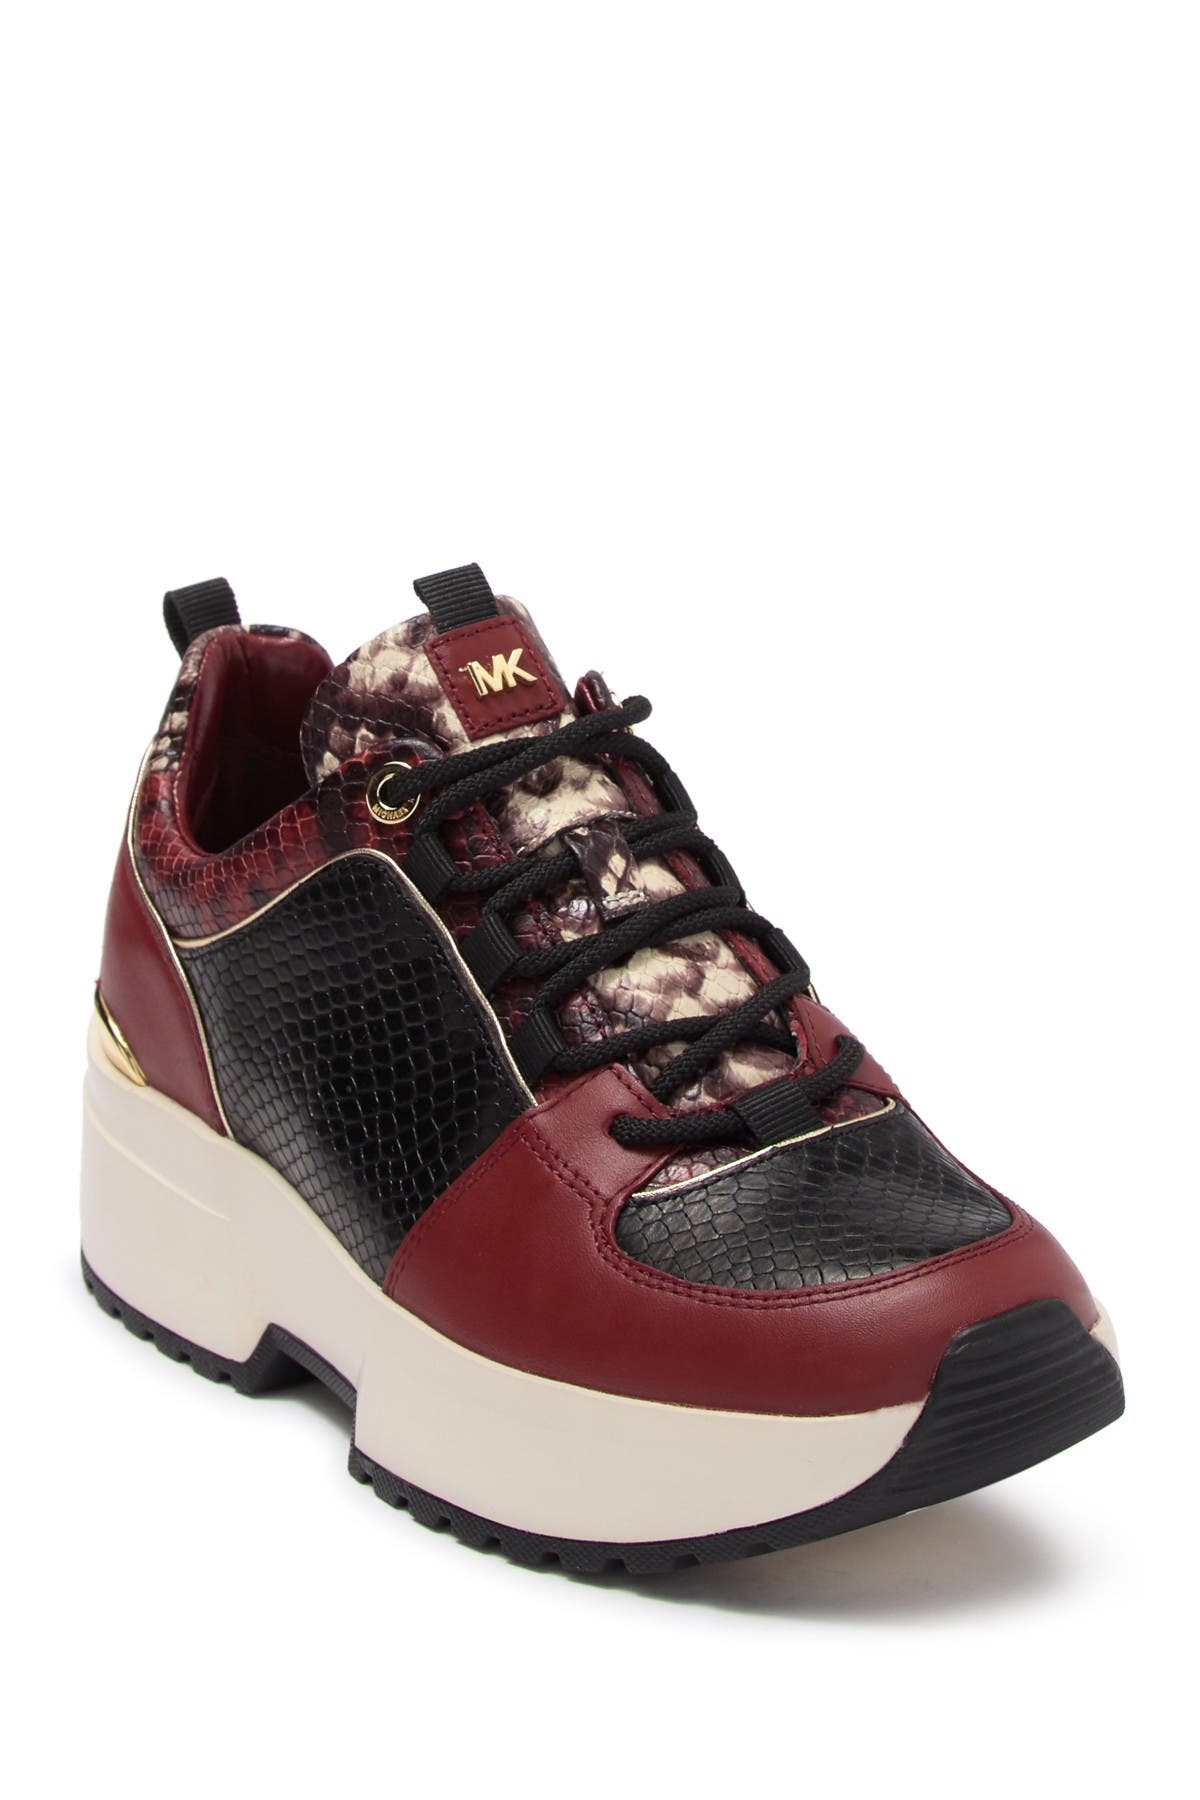 michael kors cosmo printed leather trainer